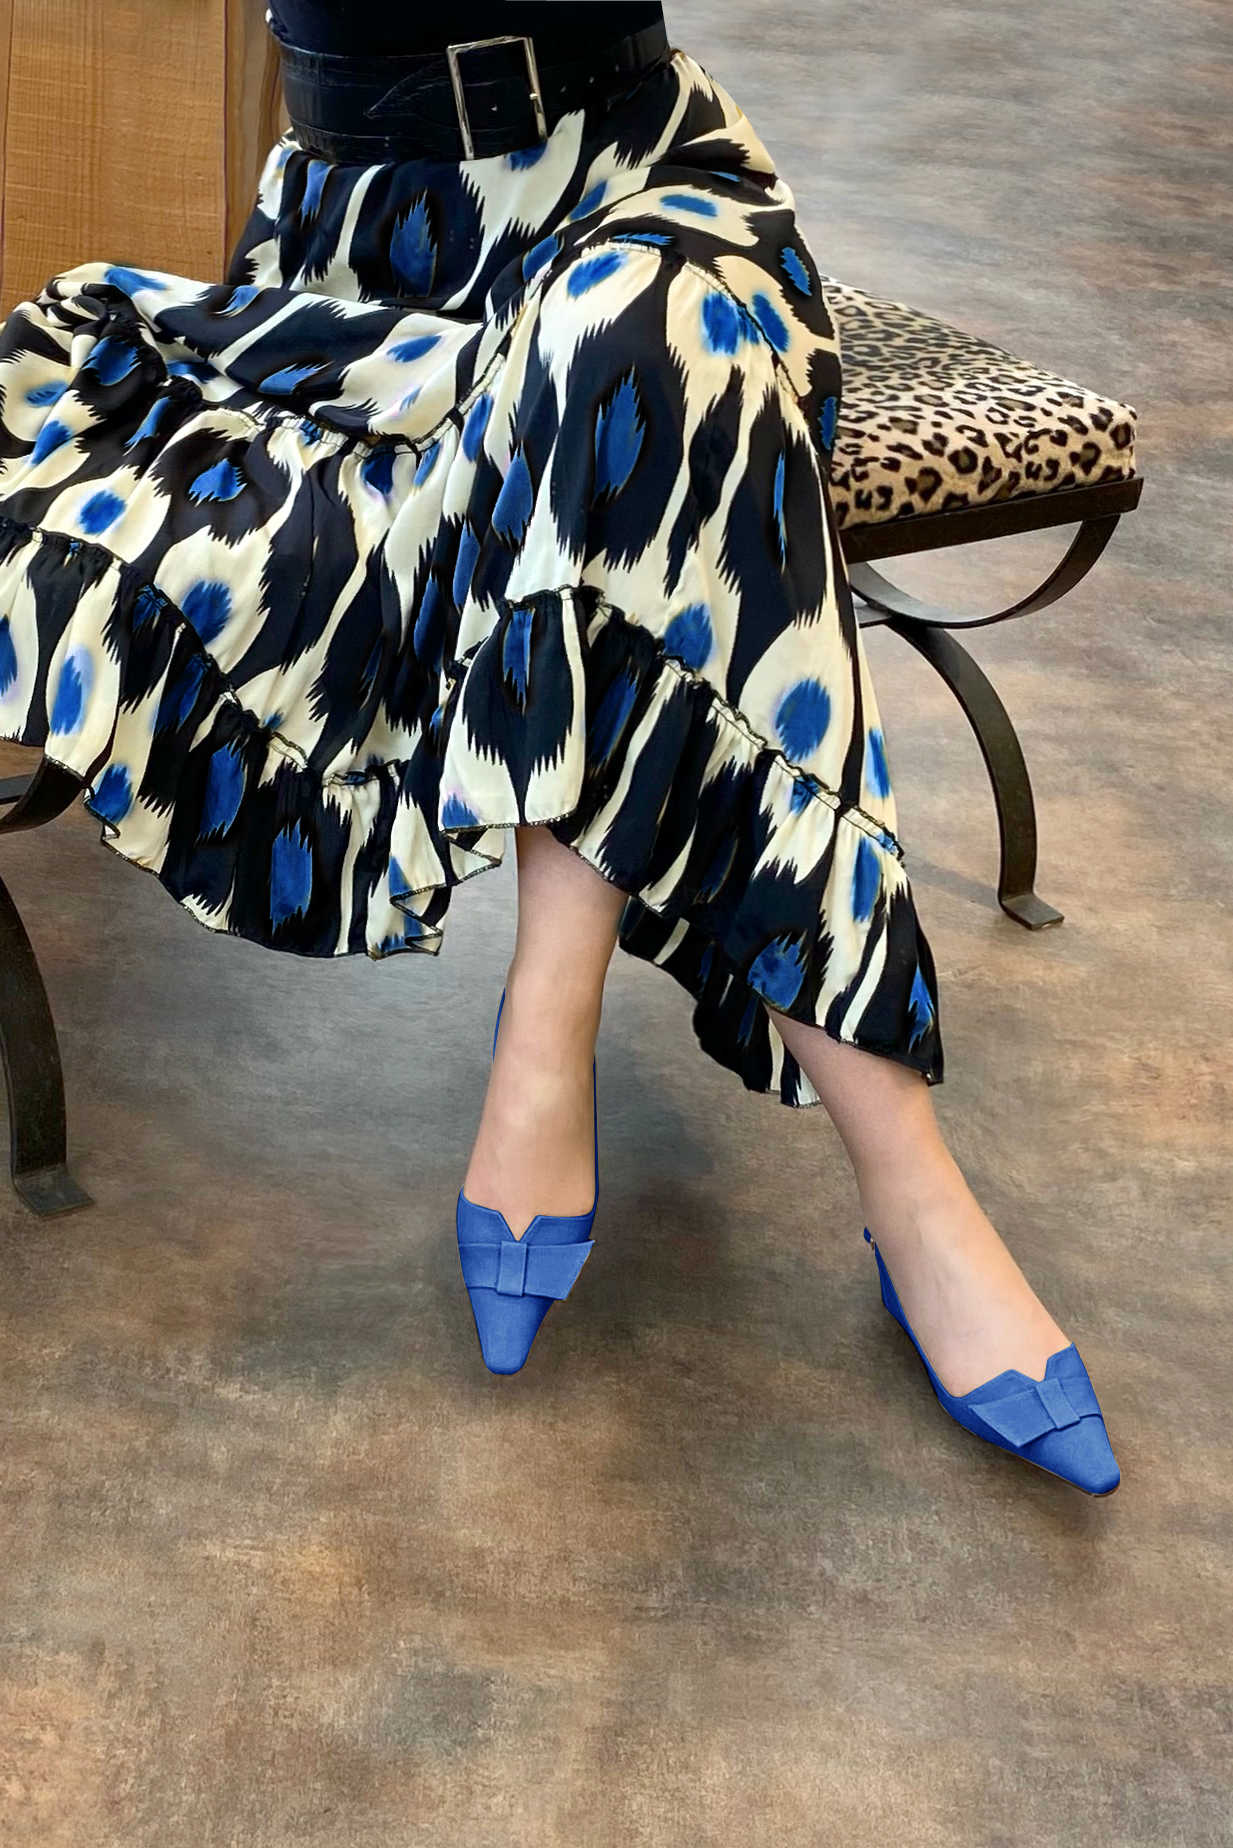 Electric blue women's open back shoes, with a knot. Tapered toe. Low block heels. Worn view - Florence KOOIJMAN